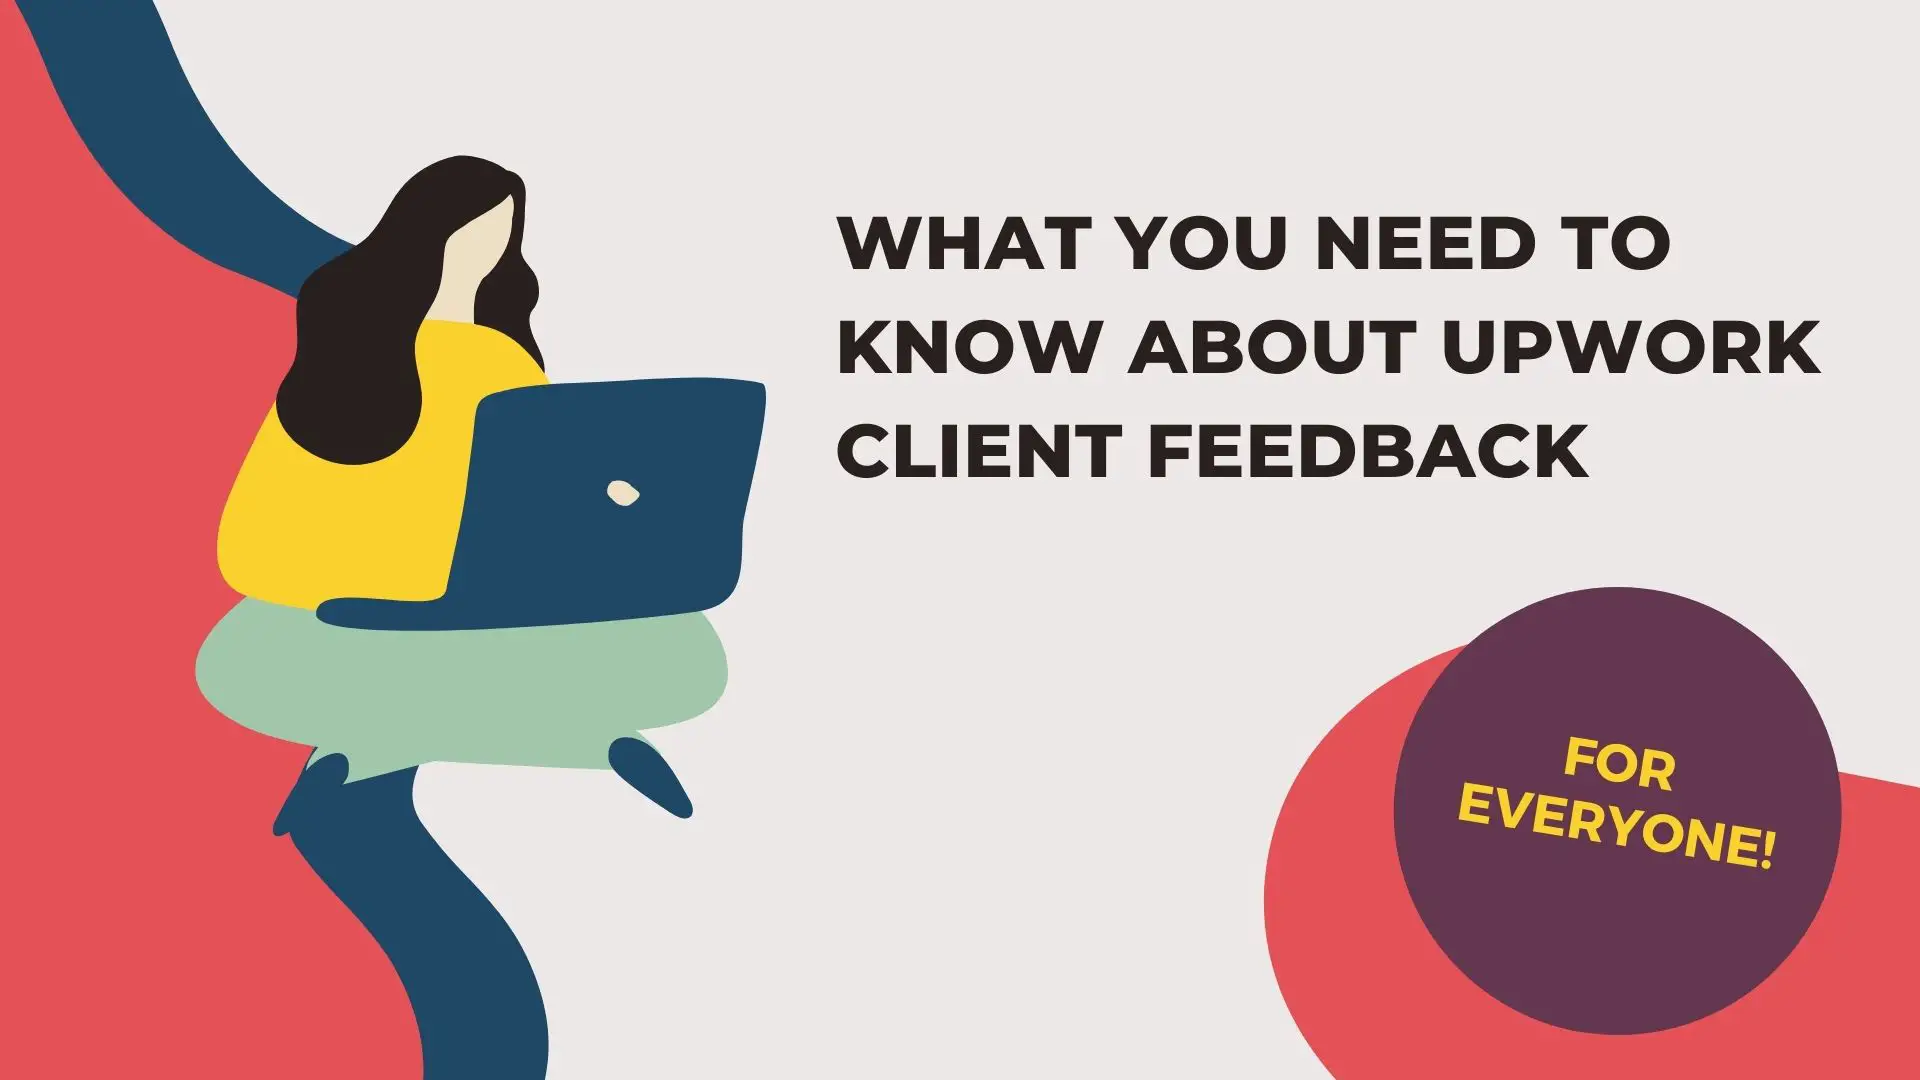 What You Need To Know About Upwork Client Feedback